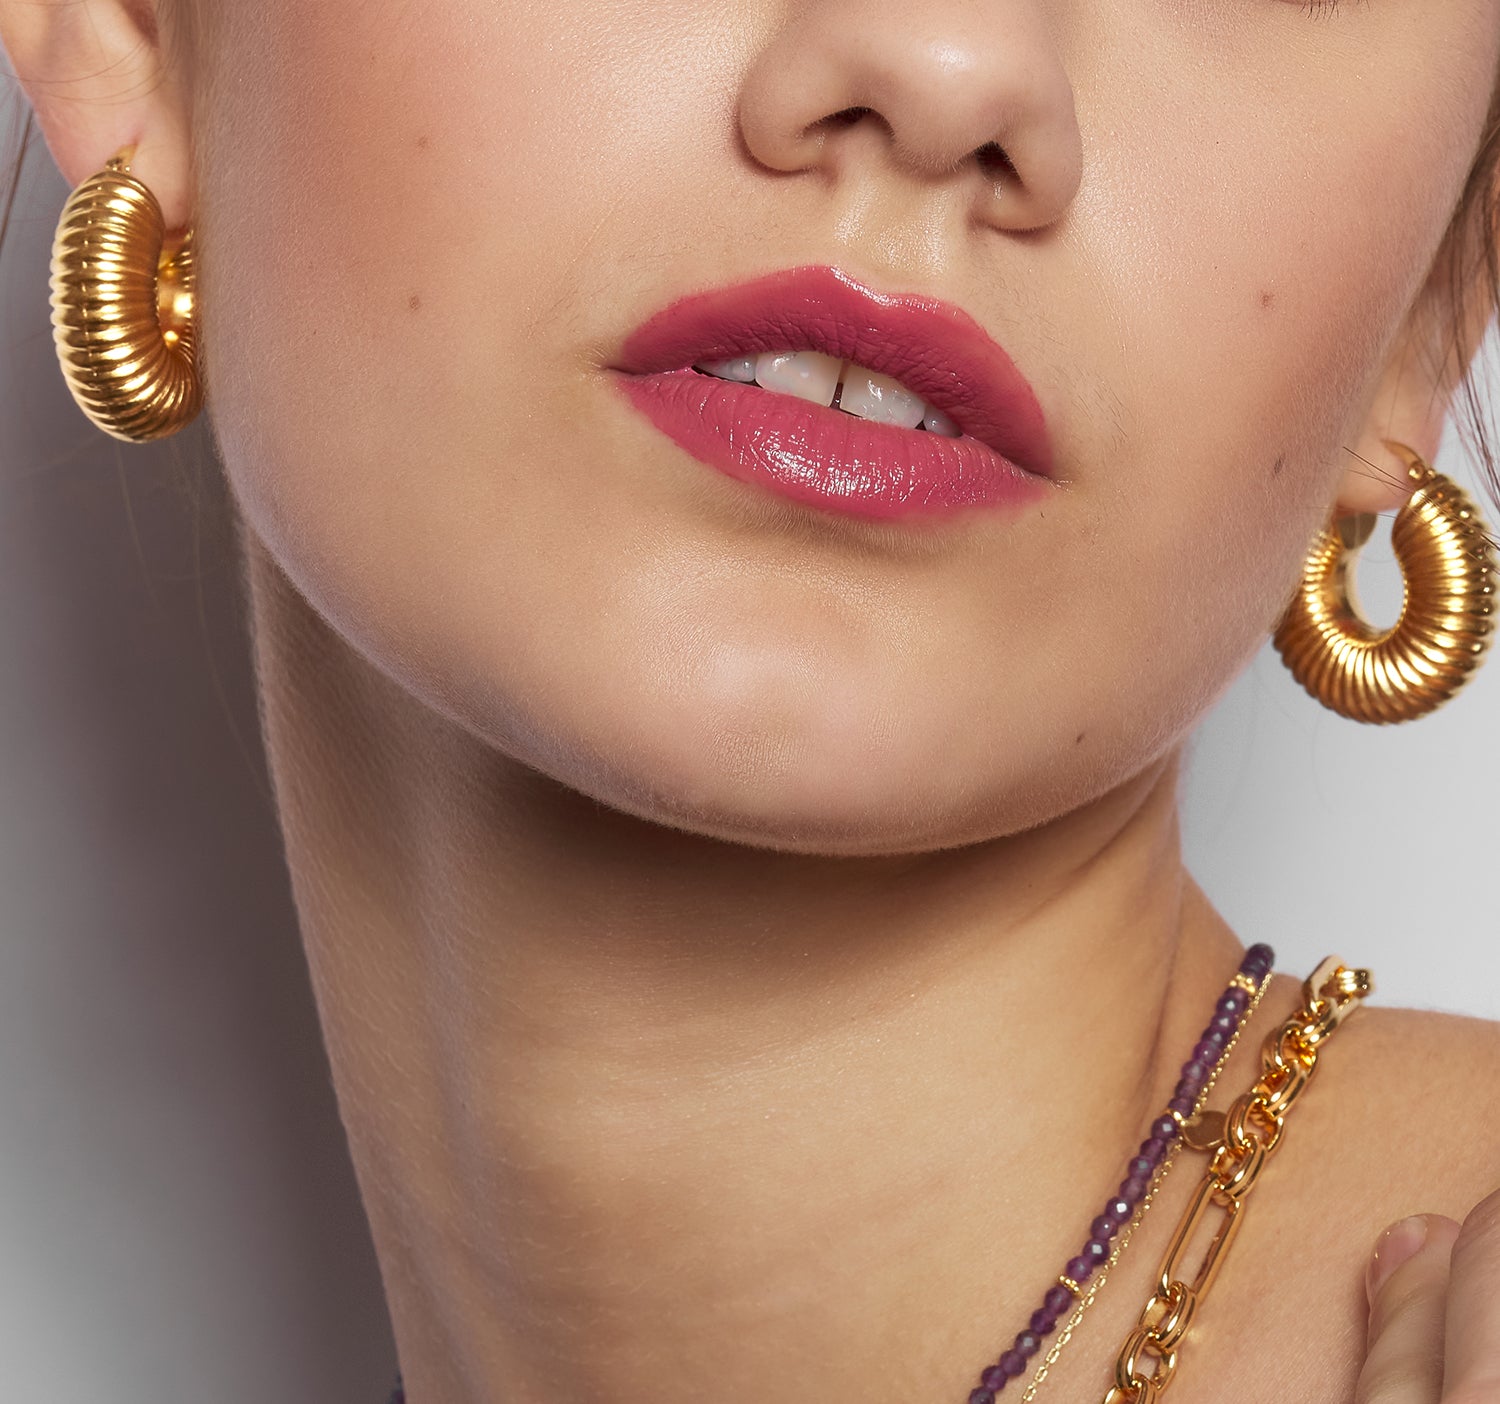 Add an effortless look to your outfit with our stylish hoop earrings.